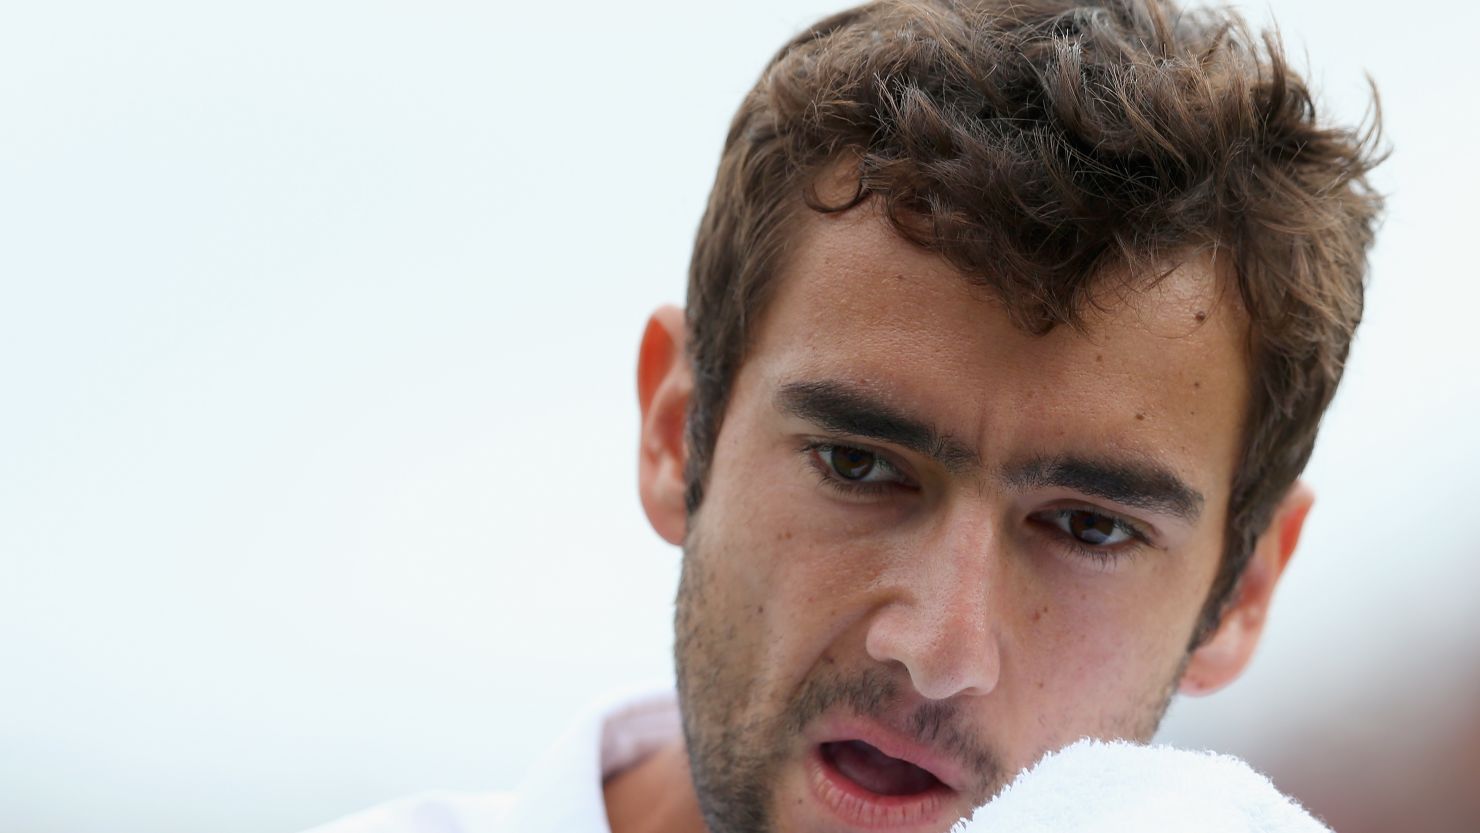 Marin Cilic made a winning return to the ATP Tour after serving a four-month doping ban.